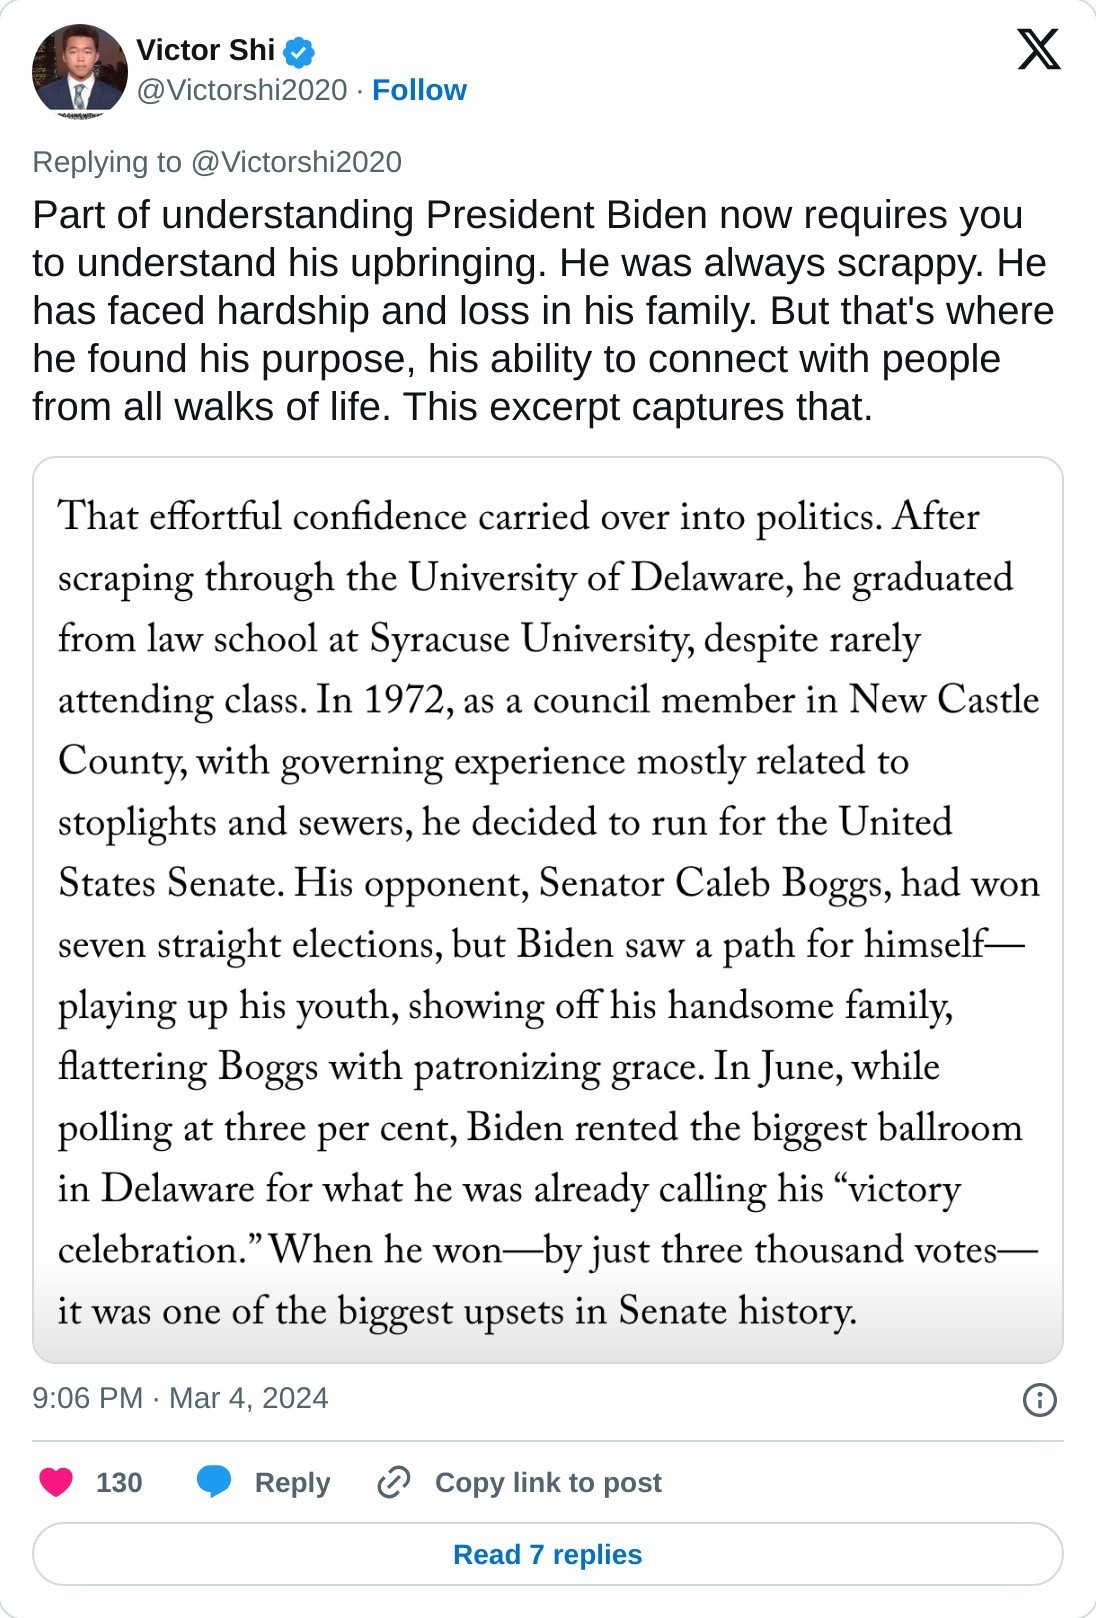 Part of understanding President Biden now requires you to understand his upbringing. He was always scrappy. He has faced hardship and loss in his family. But that's where he found his purpose, his ability to connect with people from all walks of life. This excerpt captures that. pic.twitter.com/tDEHyVuekT  — Victor Shi (@Victorshi2020) March 4, 2024